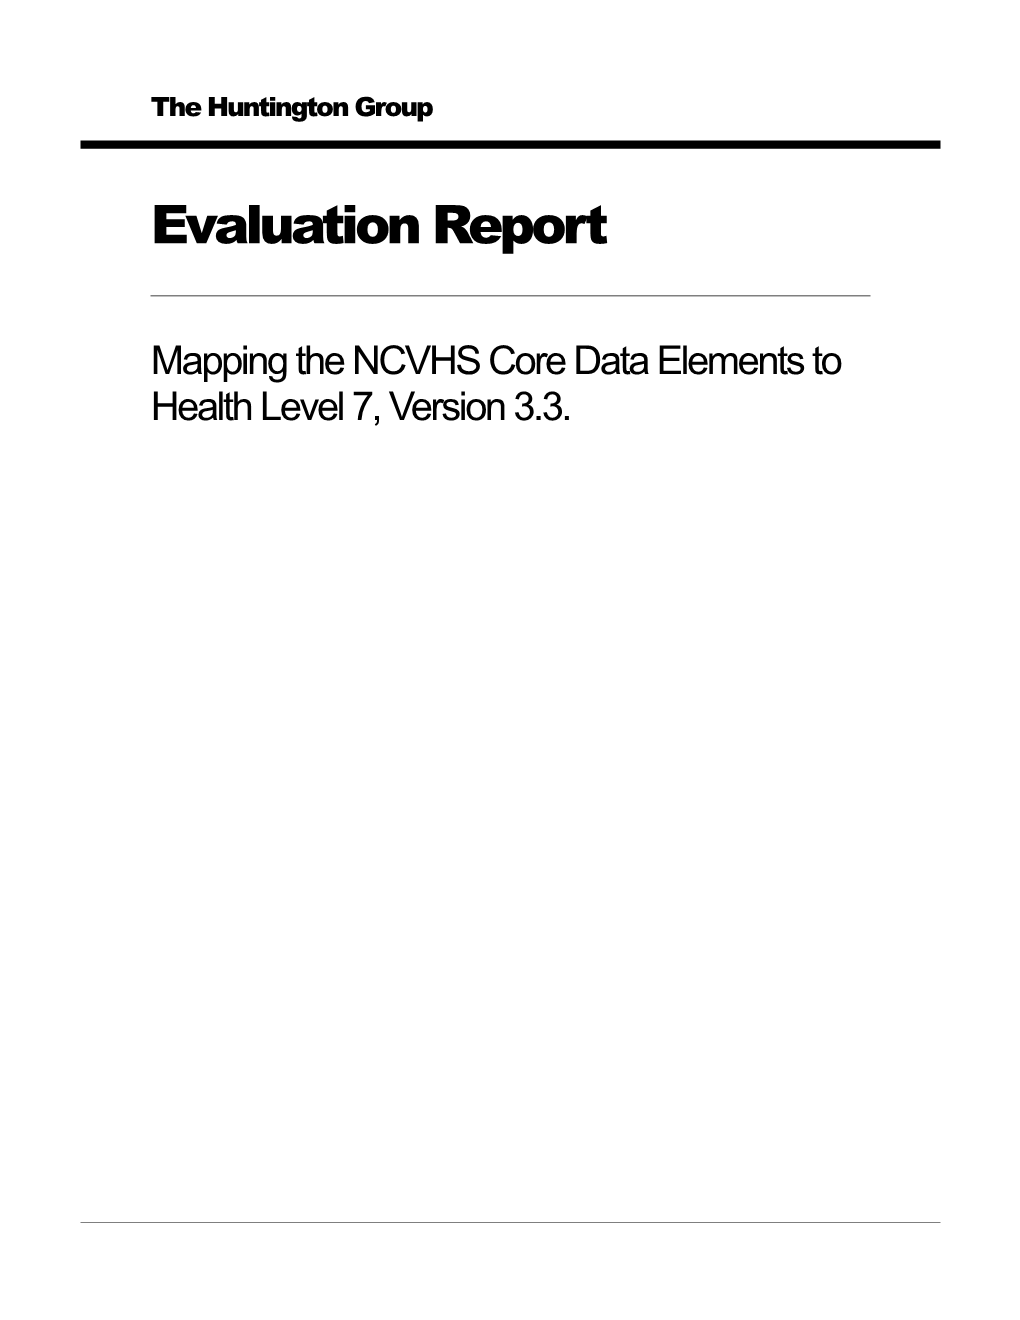 Mapping the NCVHS Core Data Elements to Health Level 7, Version 3.3